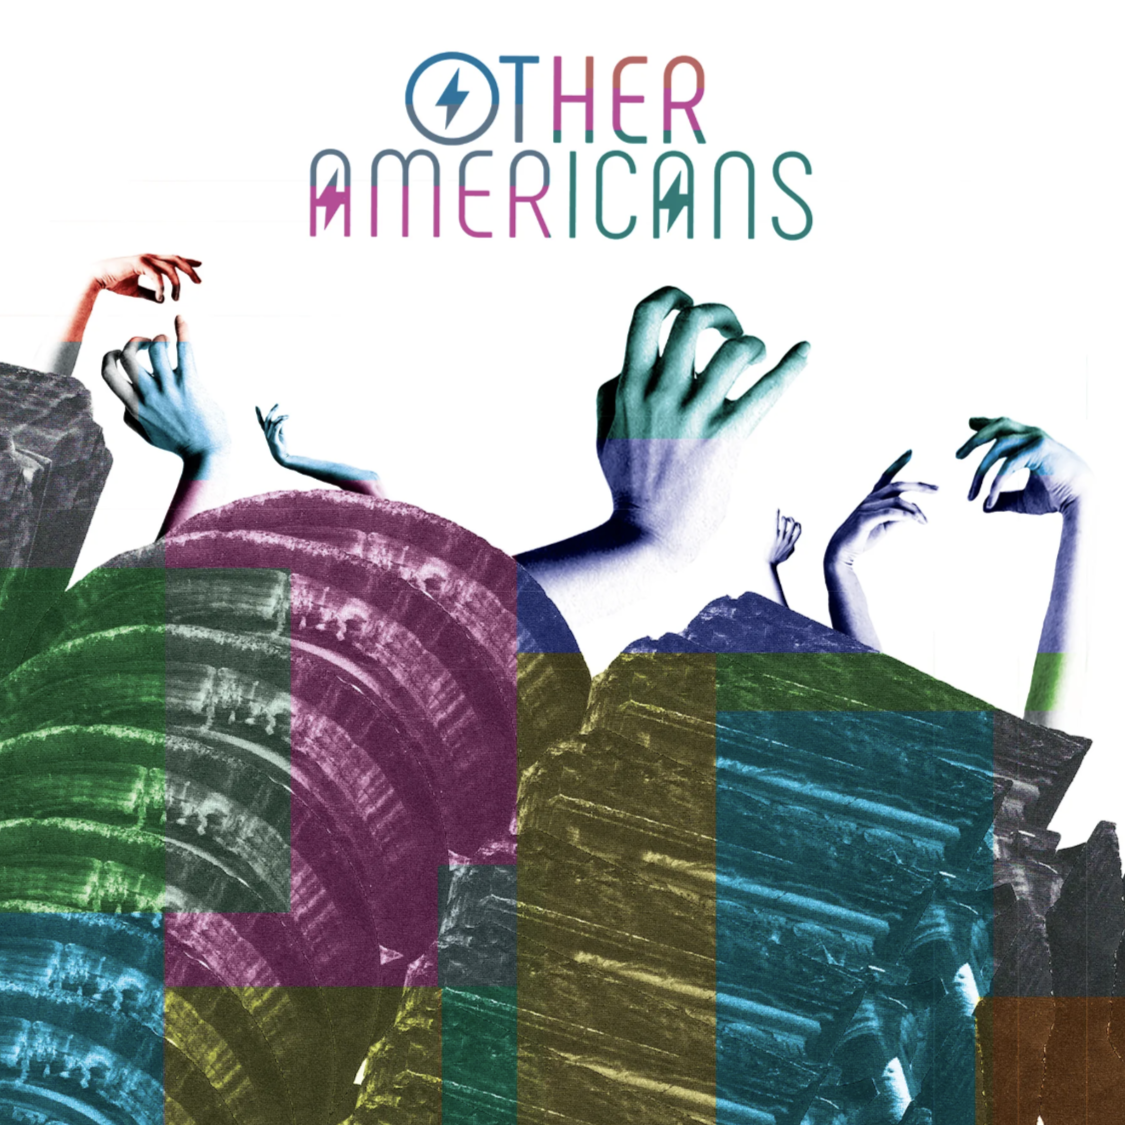 Other Americans | Self Titled